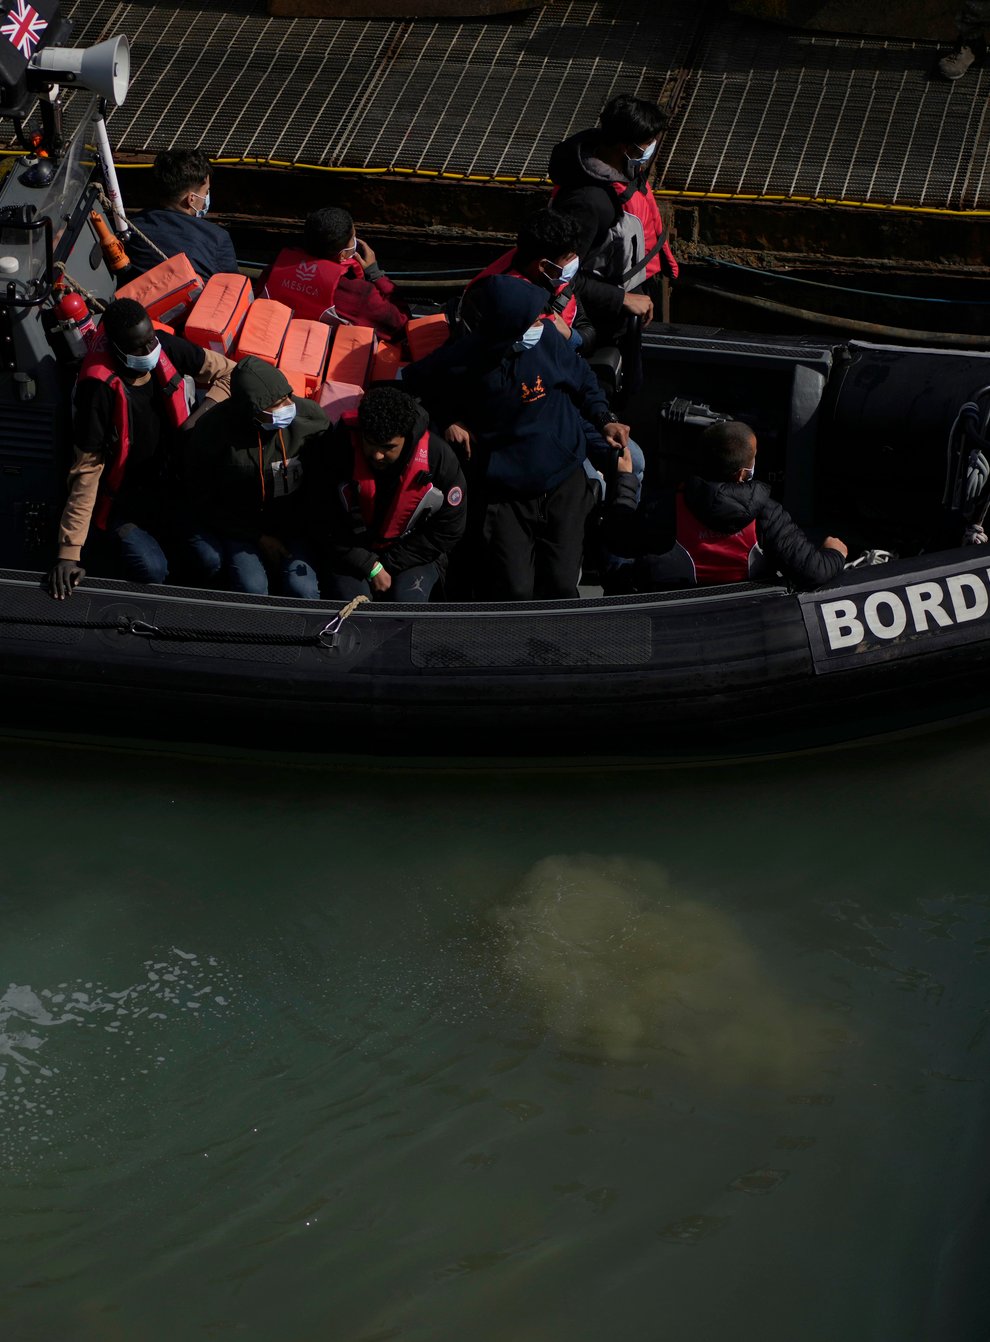 Men thought to be migrants who undertook the crossing from France in small boats and were picked up in the Channel (AP)